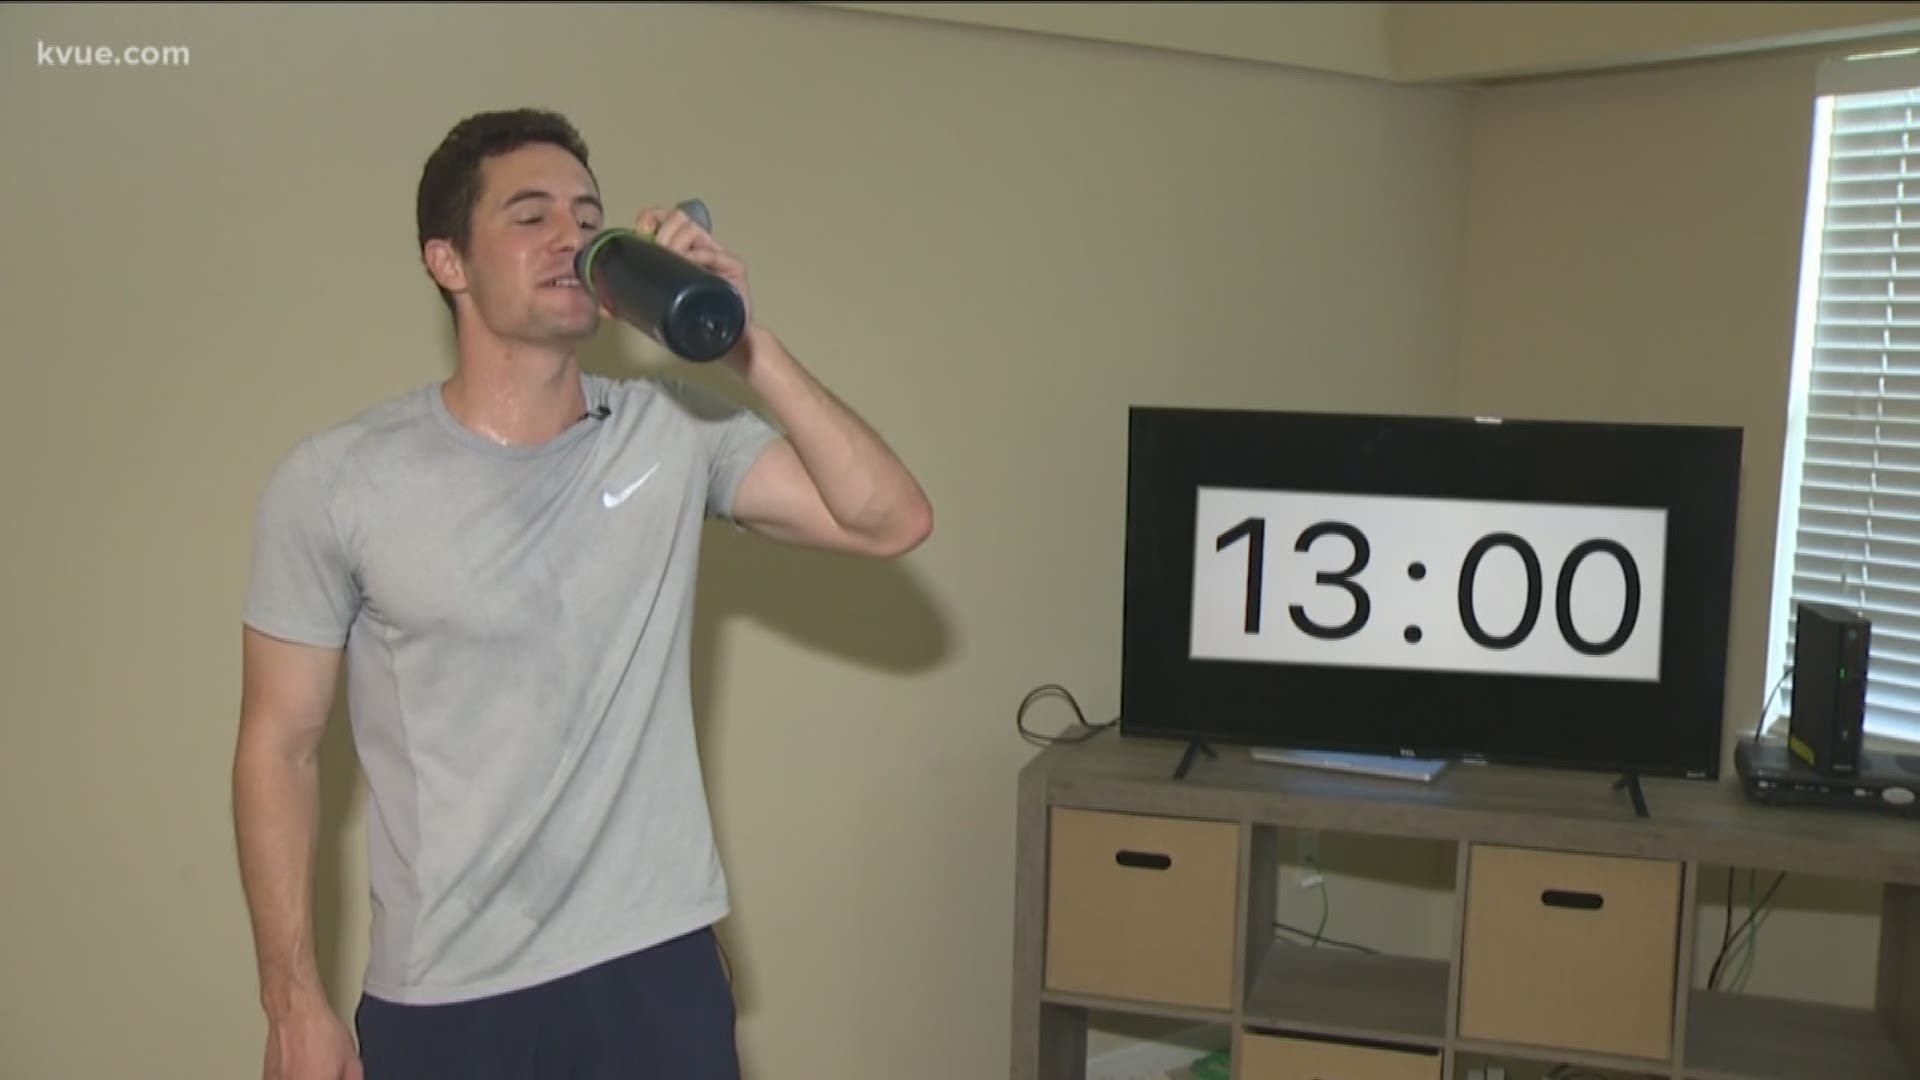 A workout that starts off easy gets hard quickly – can you beat Jake's record?